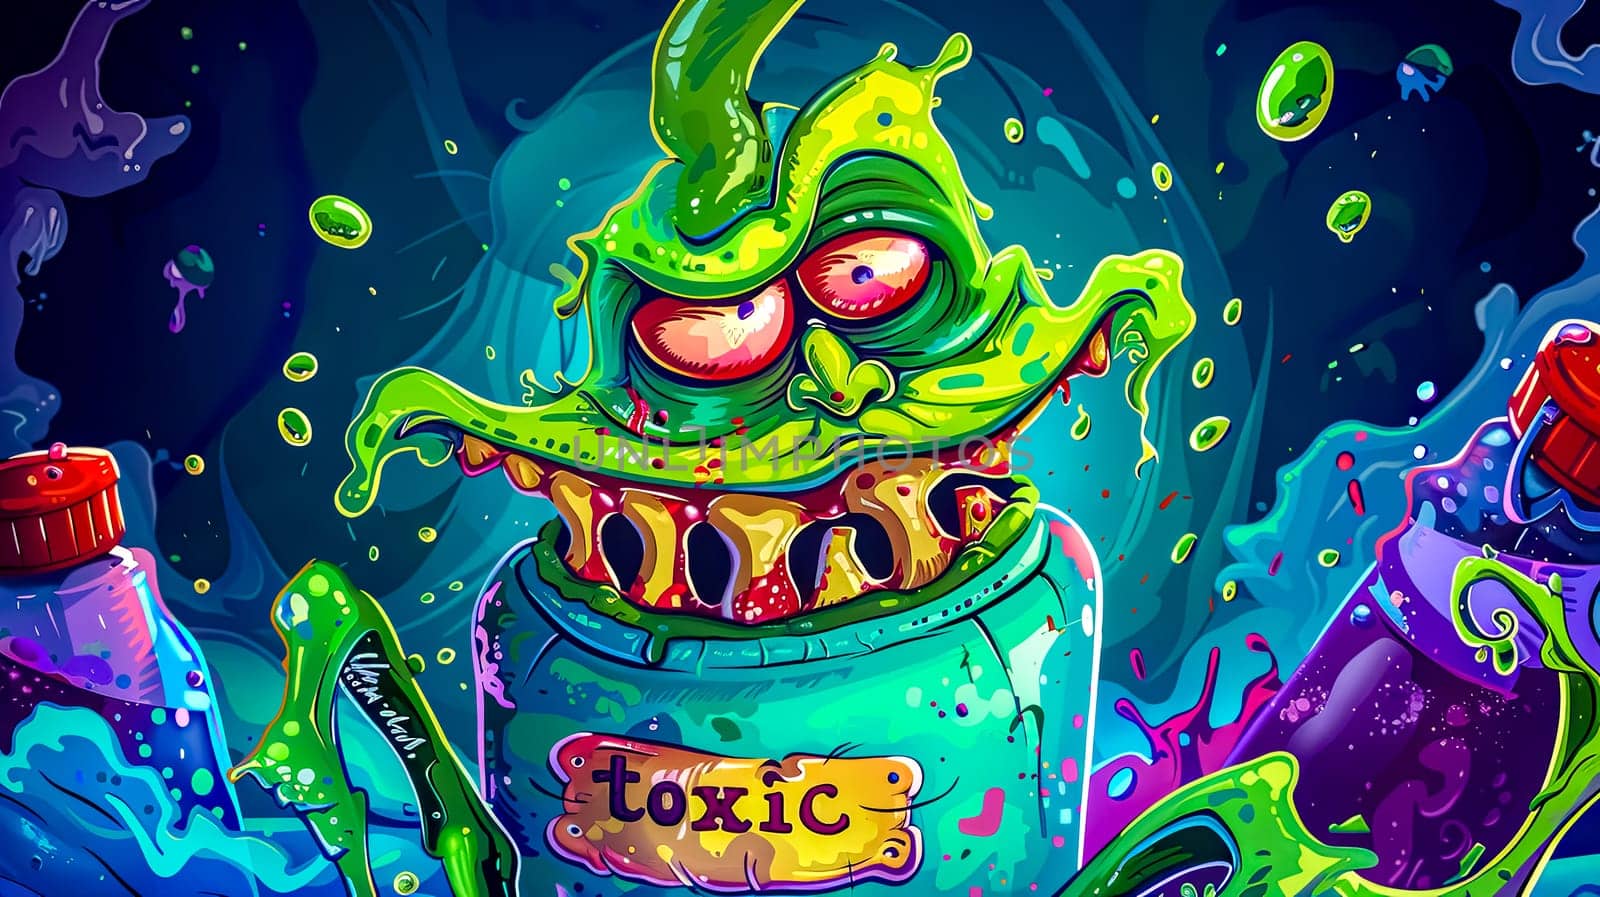 Vibrant illustration of a cartoon slime monster escaping a toxic waste container